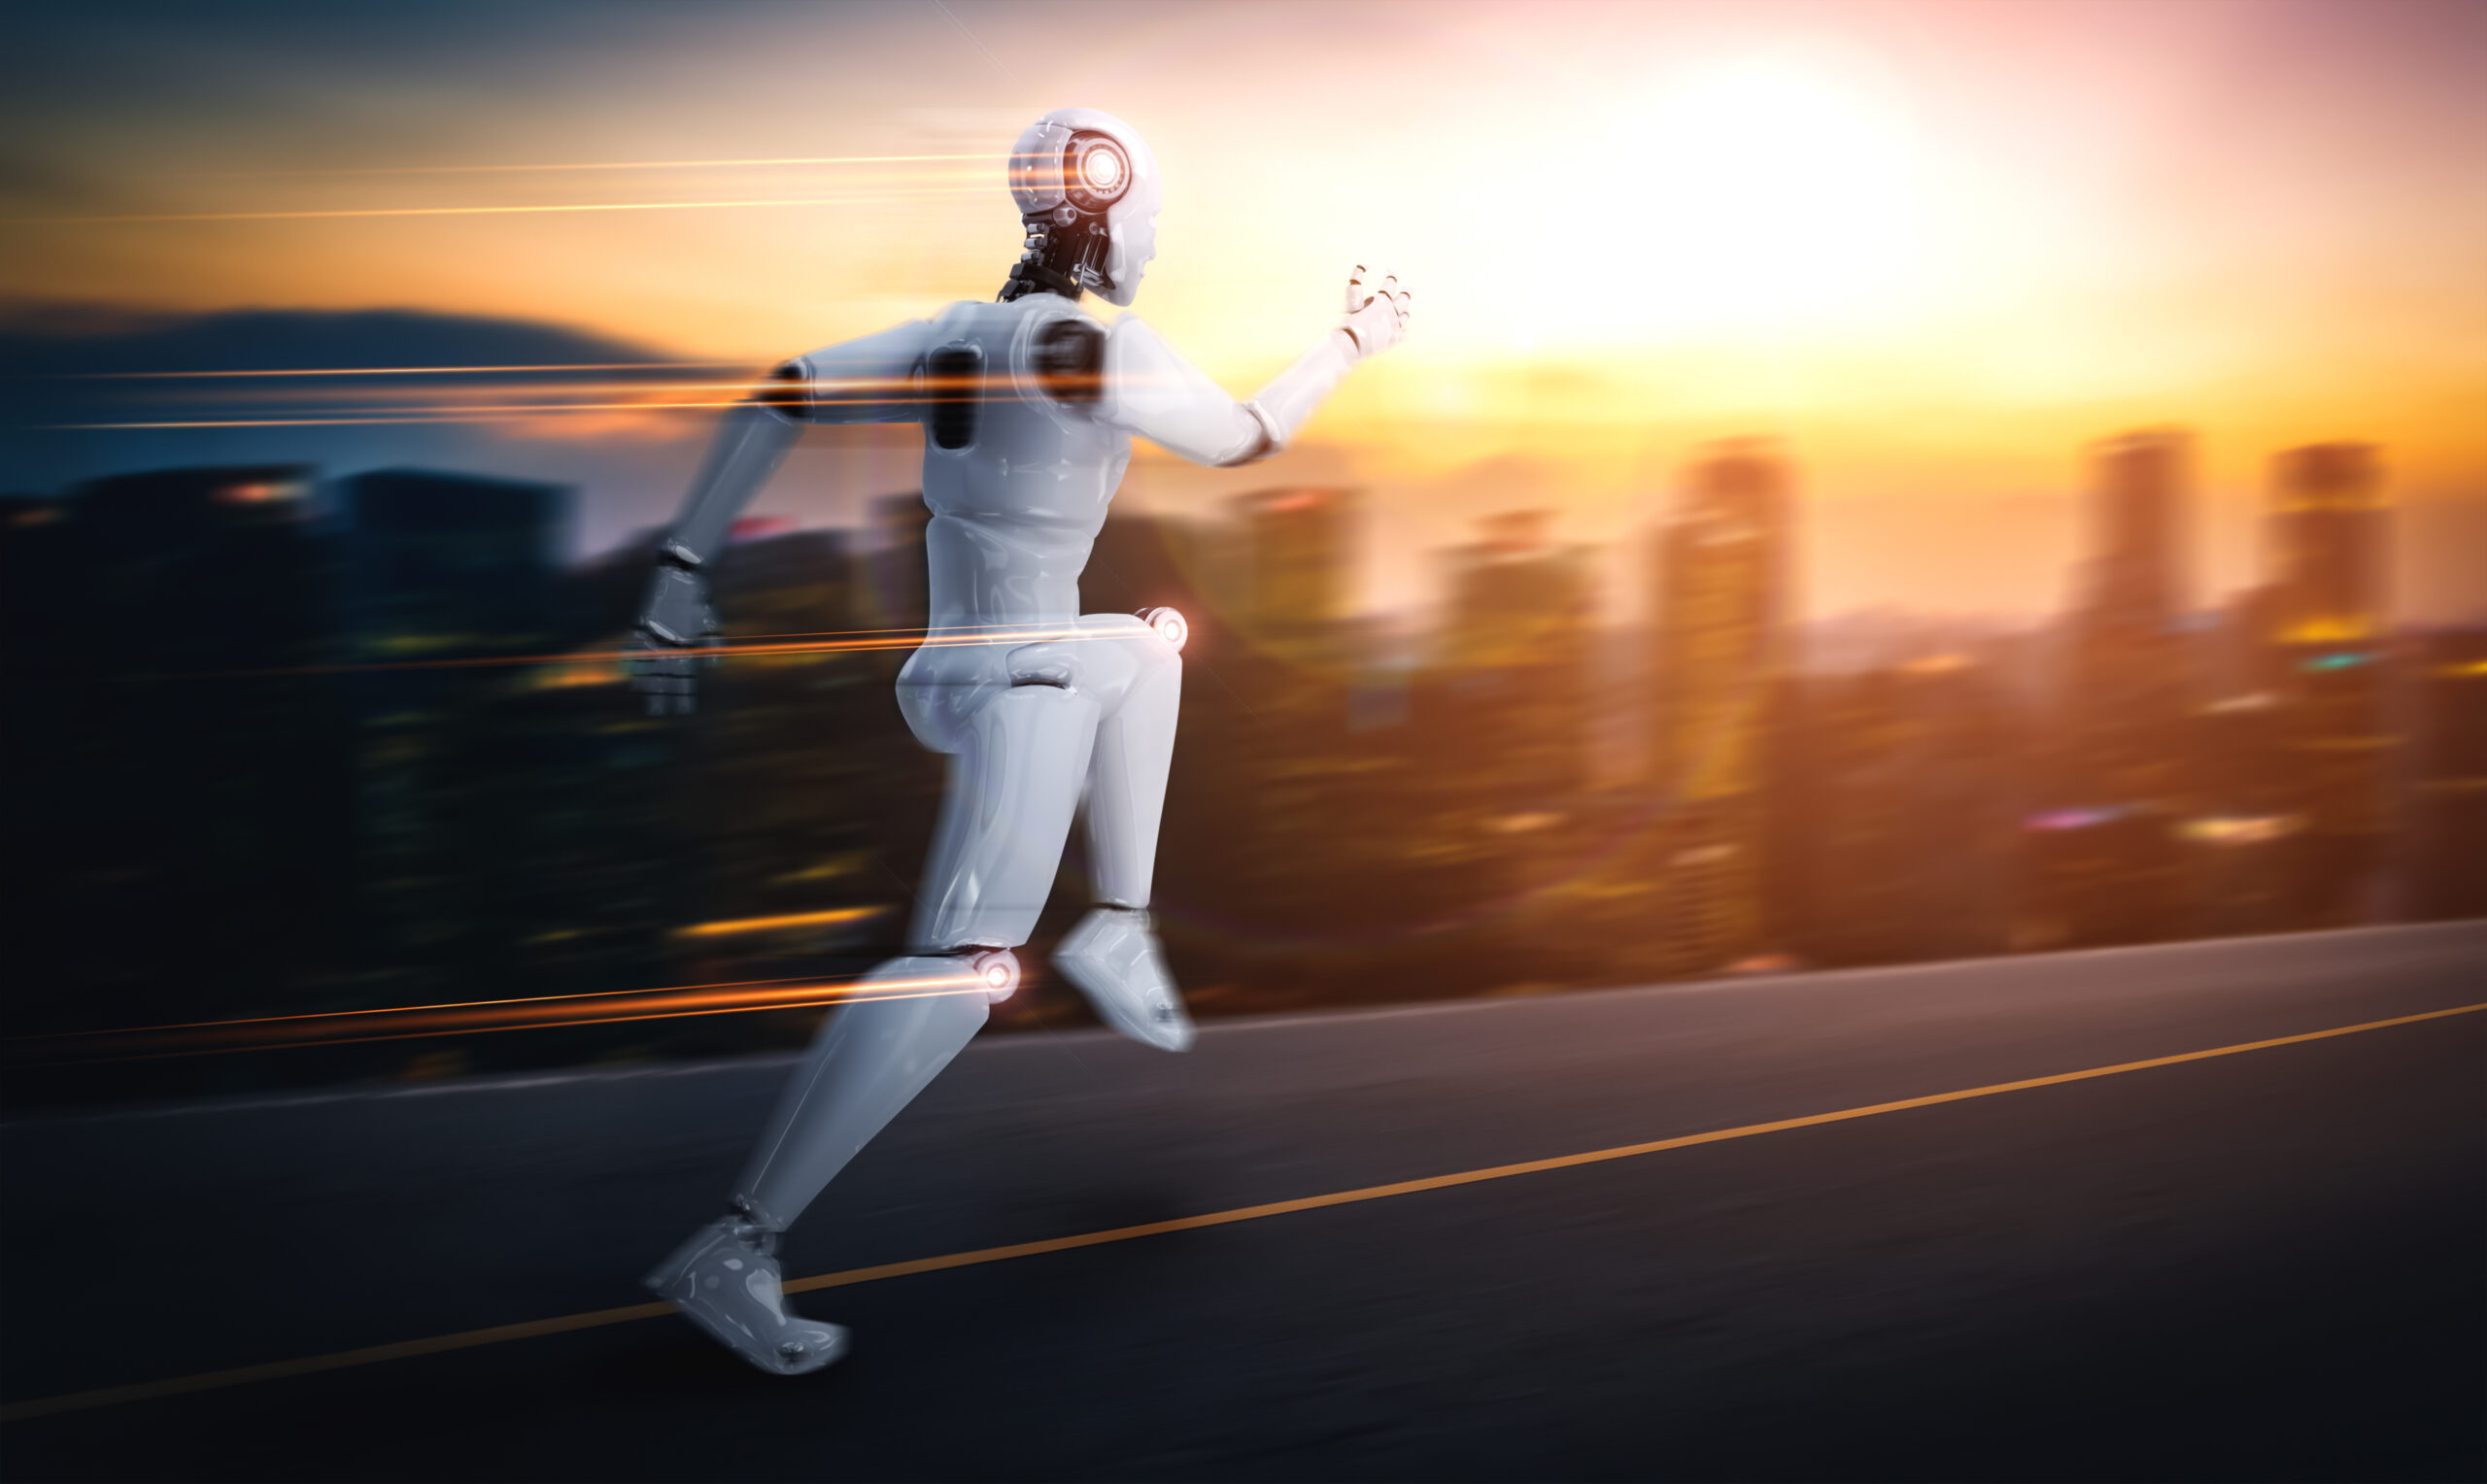 Running robot humanoid showing fast movement and vital energy in concept of future innovation development toward AI brain and artificial intelligence thinking by machine learning.